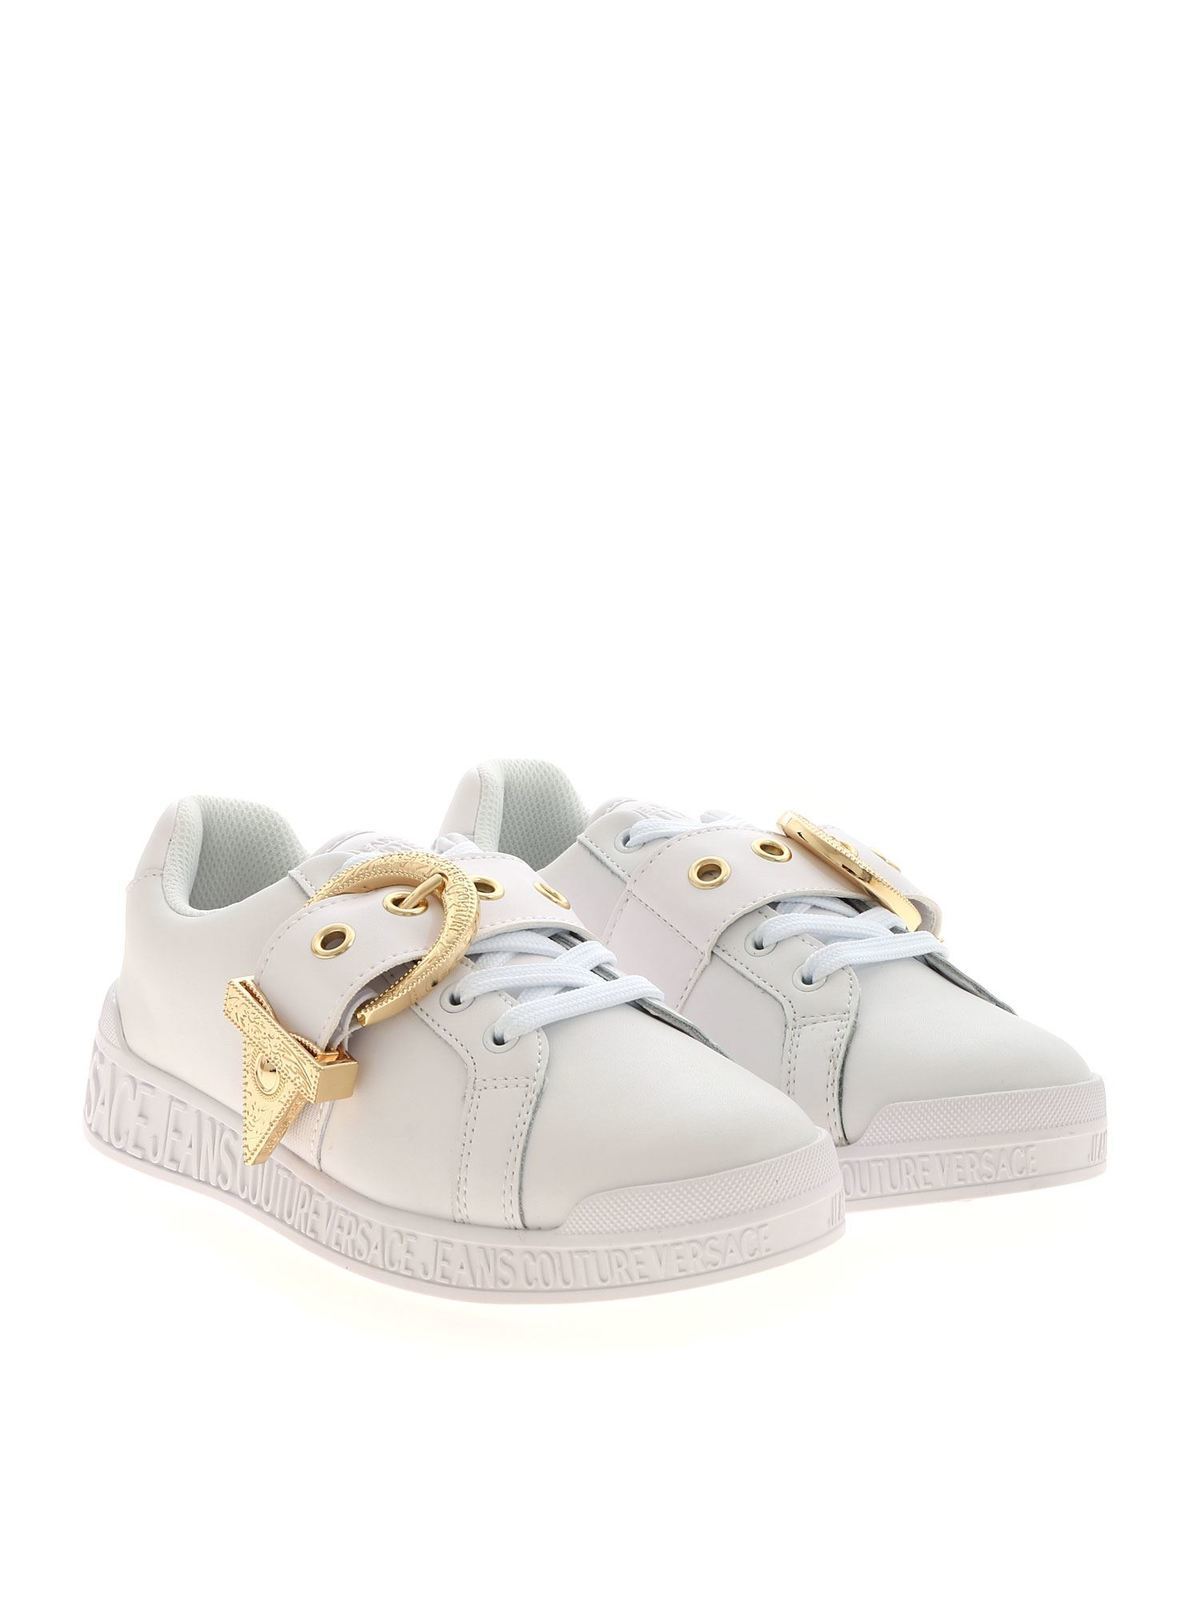 versace sneakers white gold